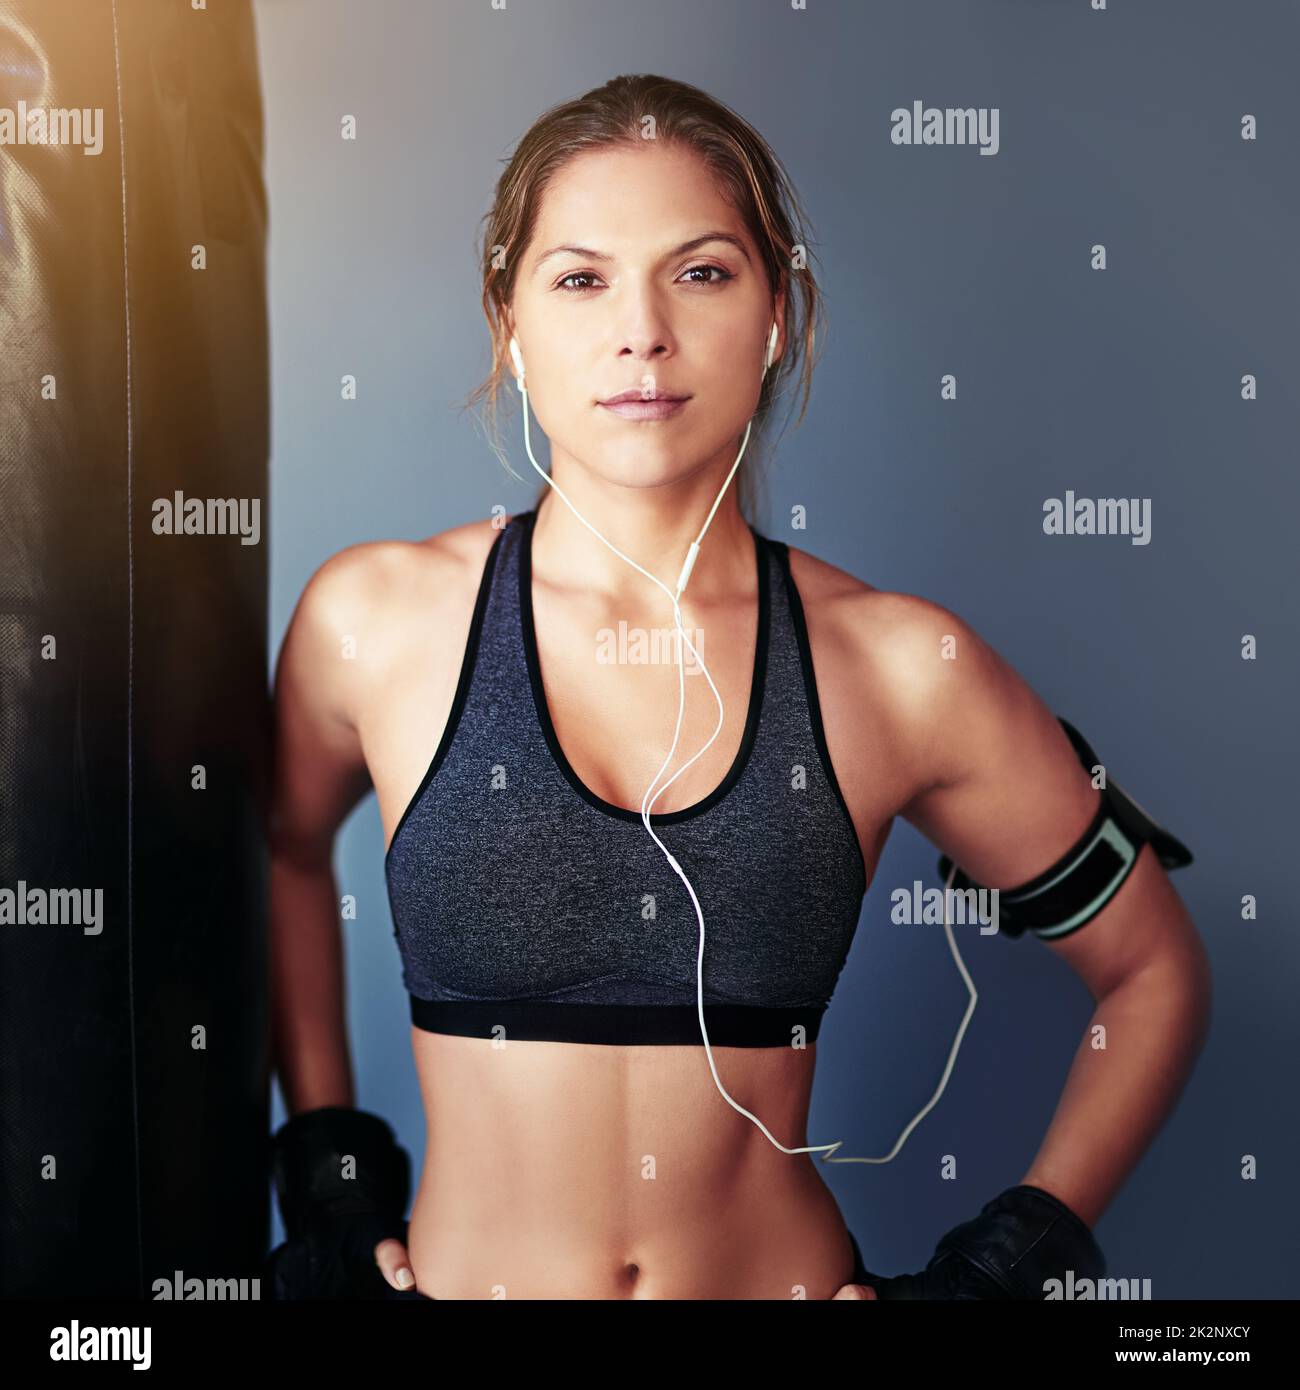 Ready for any challenge. Portrait of a female boxer standing beside a punching bag. Stock Photo